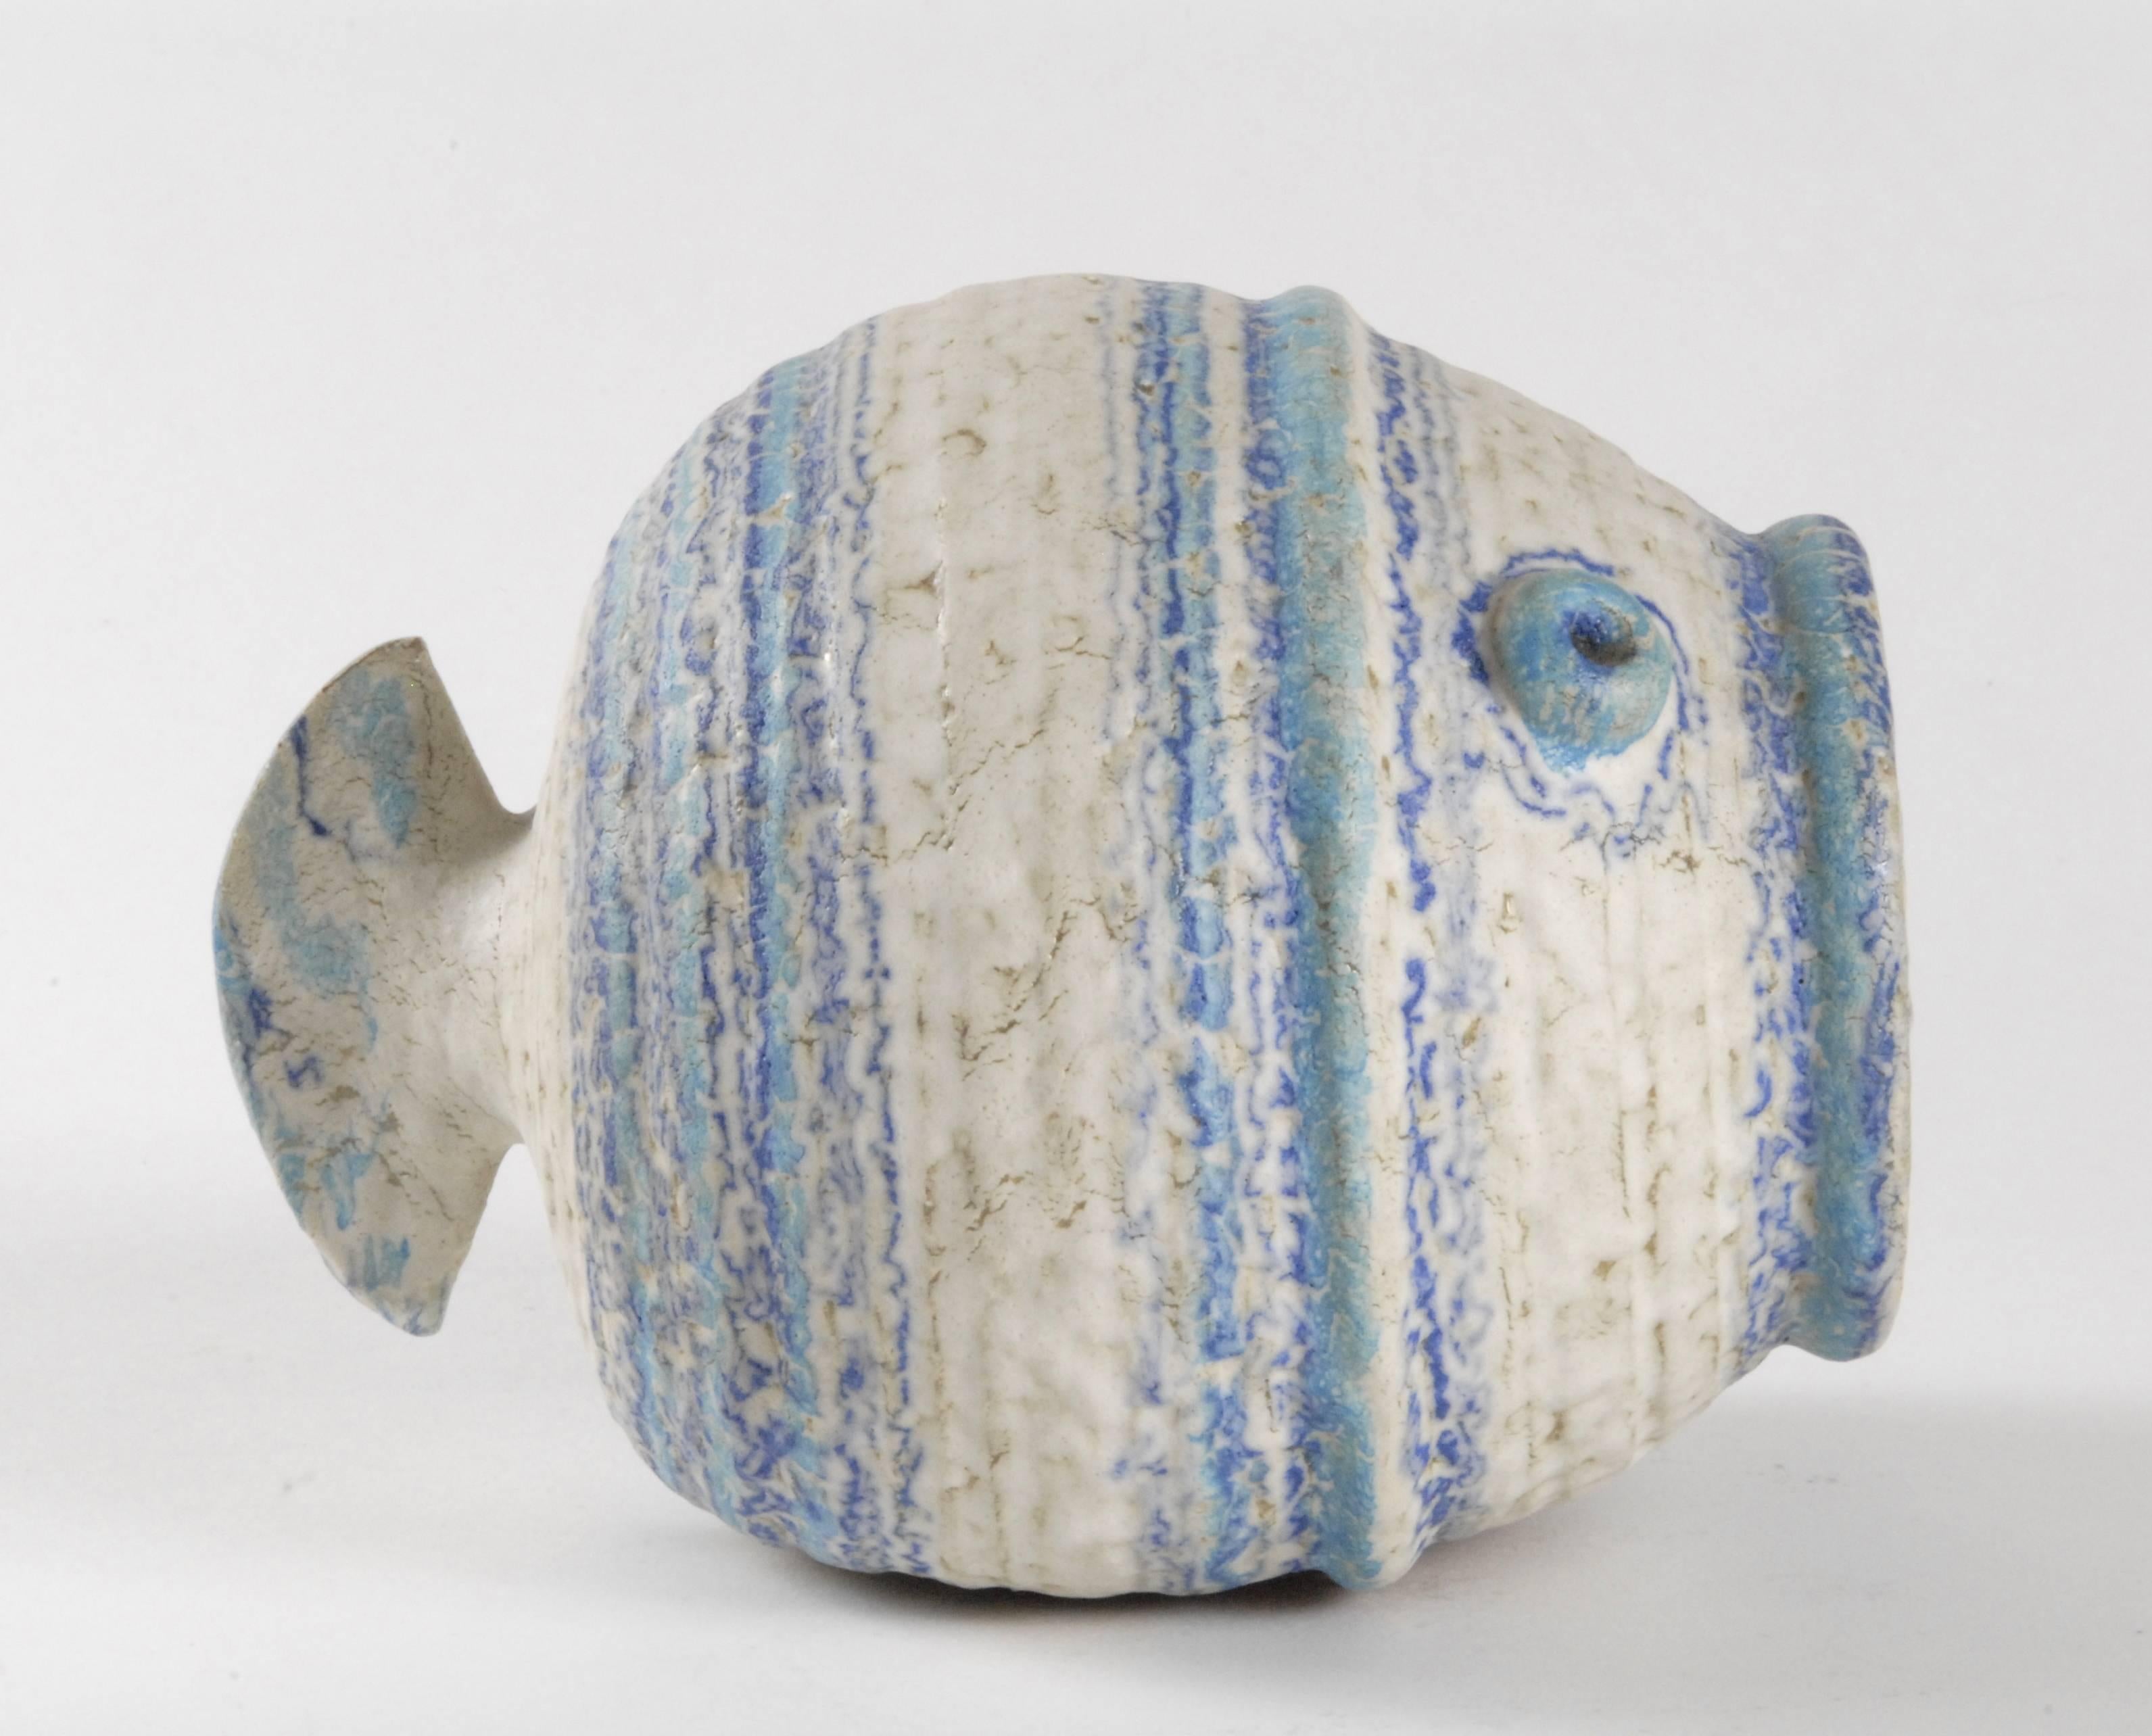 An Aldo Londi designed globular fish in matte off-white, royal blue and turquoise glazes with a mottled effect.